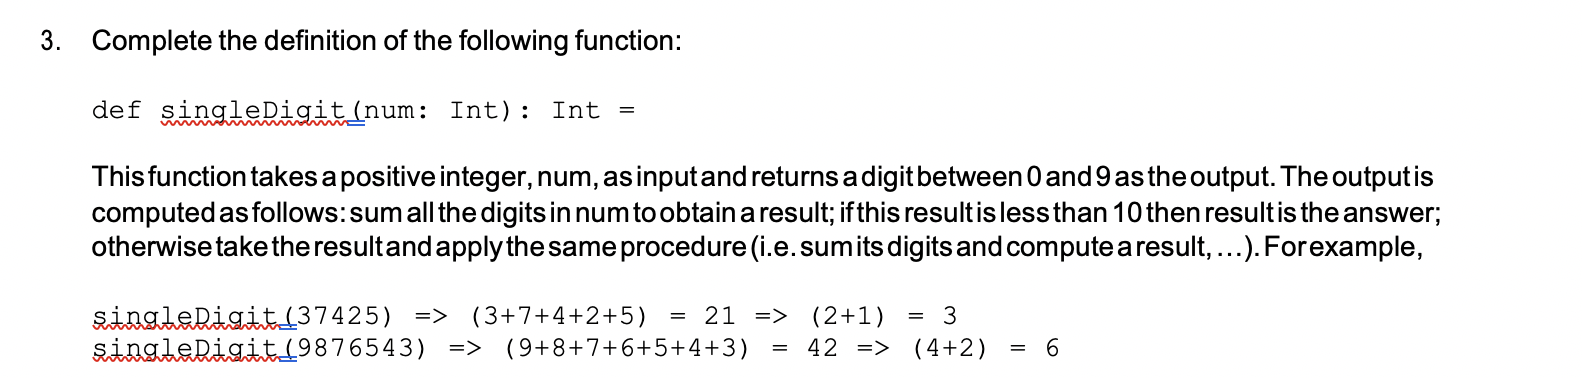 3. Complete the definition of the following function: def singleDigit(num: Int): Int = This function takes a positive integer